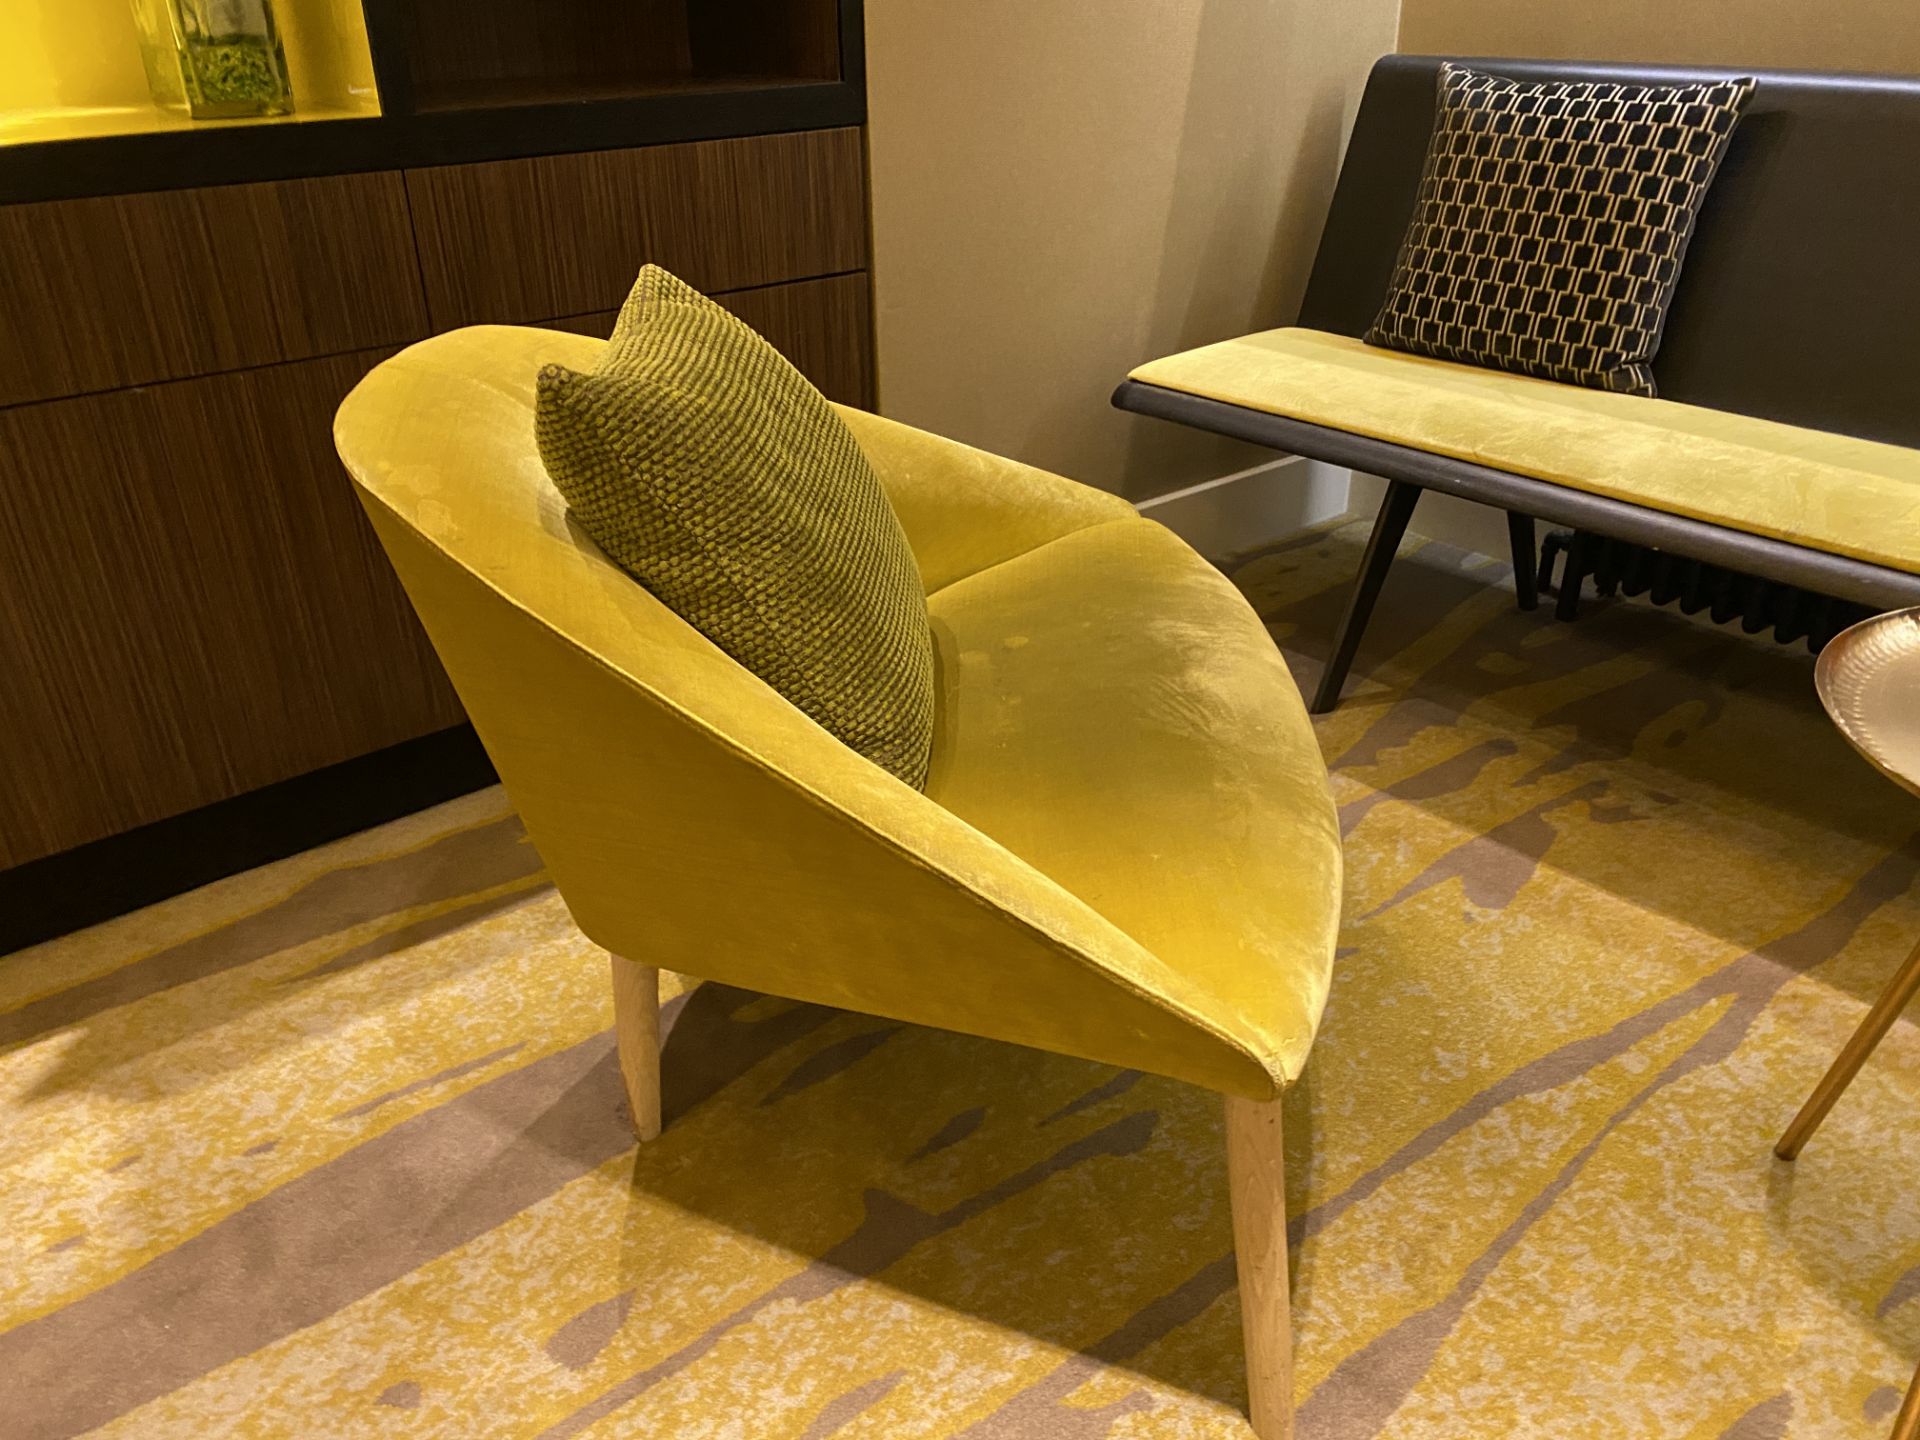 Designer Low profile Lounge Chair in Citrine - Image 2 of 2